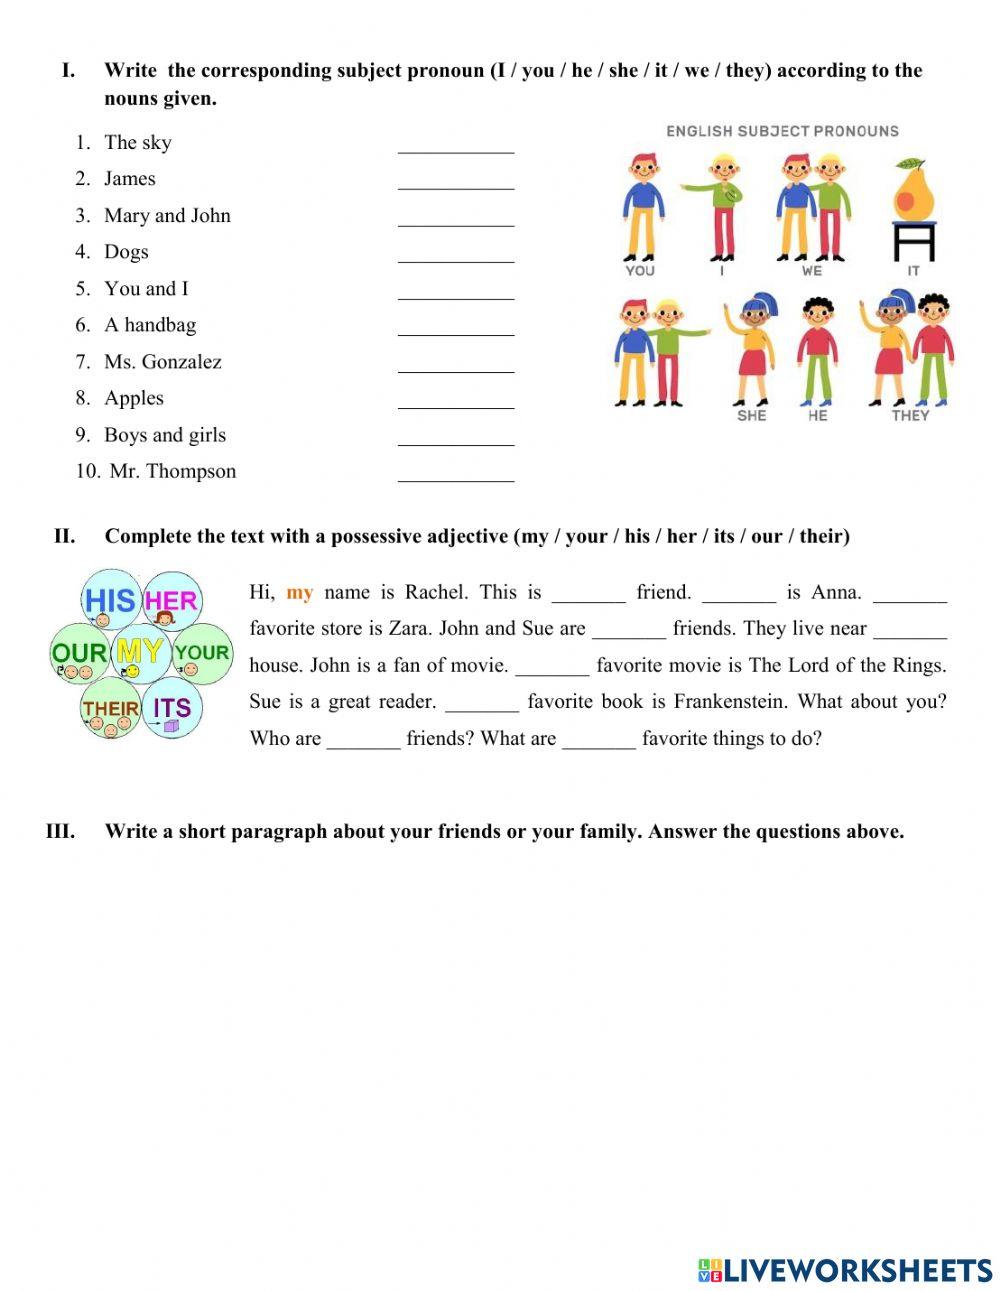 Subject pronouns and possessive adjectives